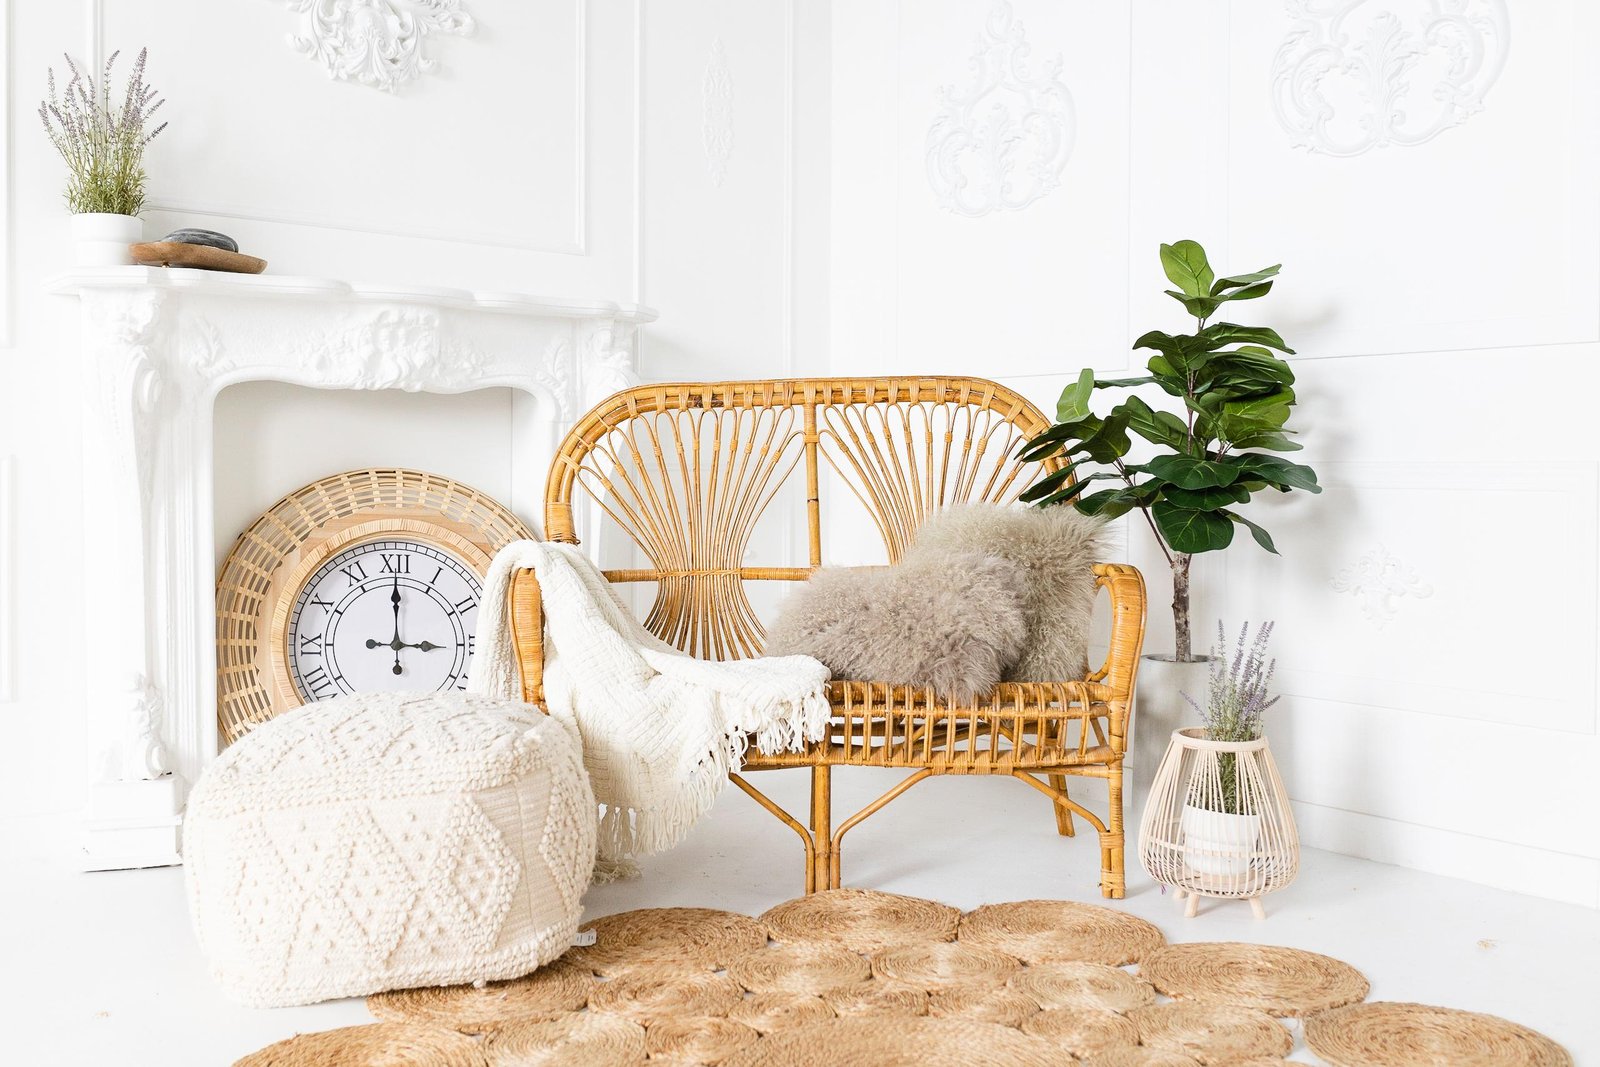 wicker chair, decorative tree, and pouf- photography props